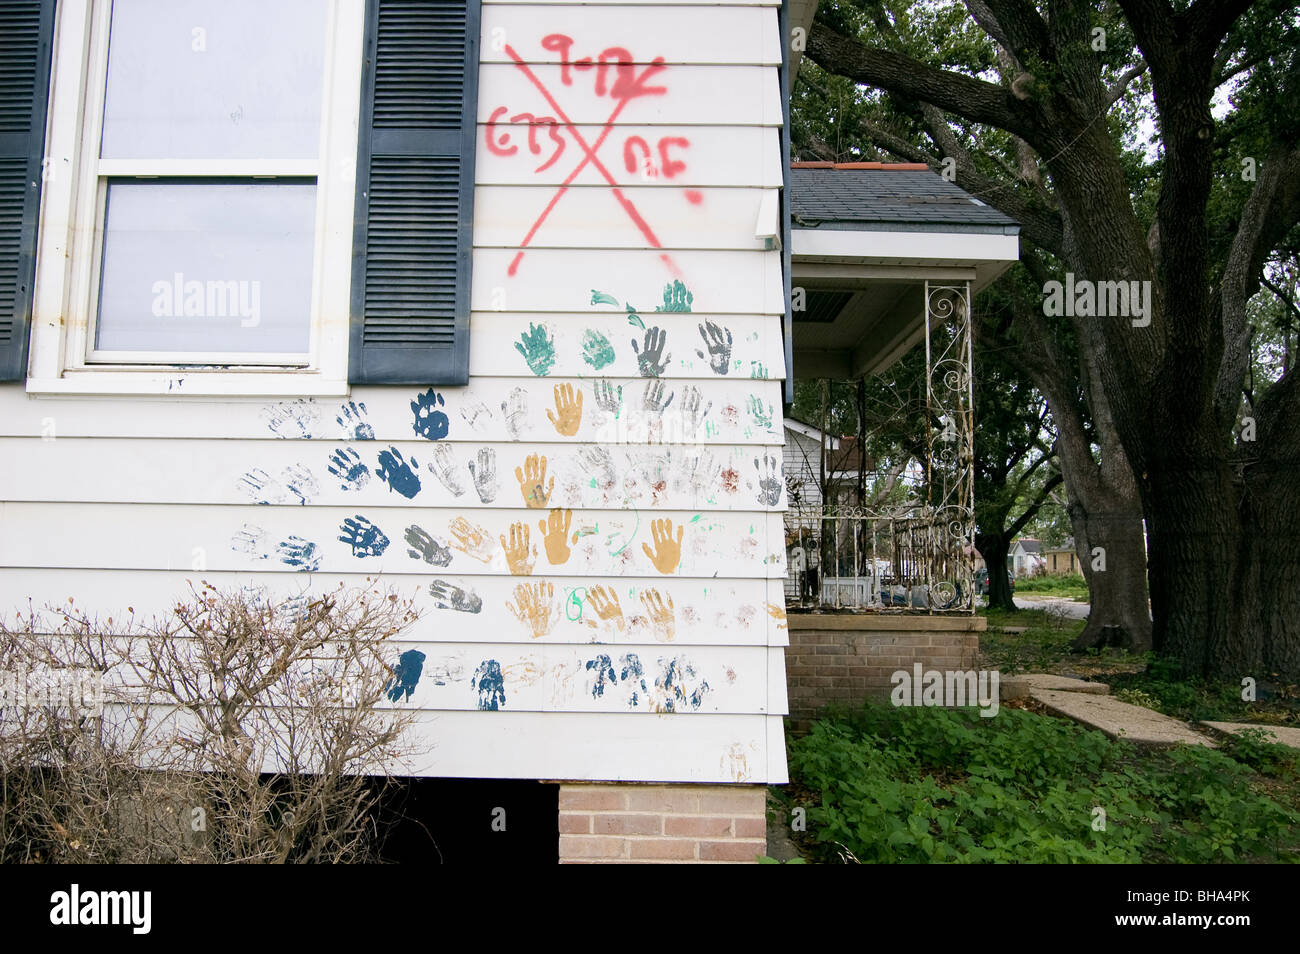 The external wall of a house has hand prints in various colors. 9 months after Hurricane Katrina, New Orleans, LA. Stock Photo